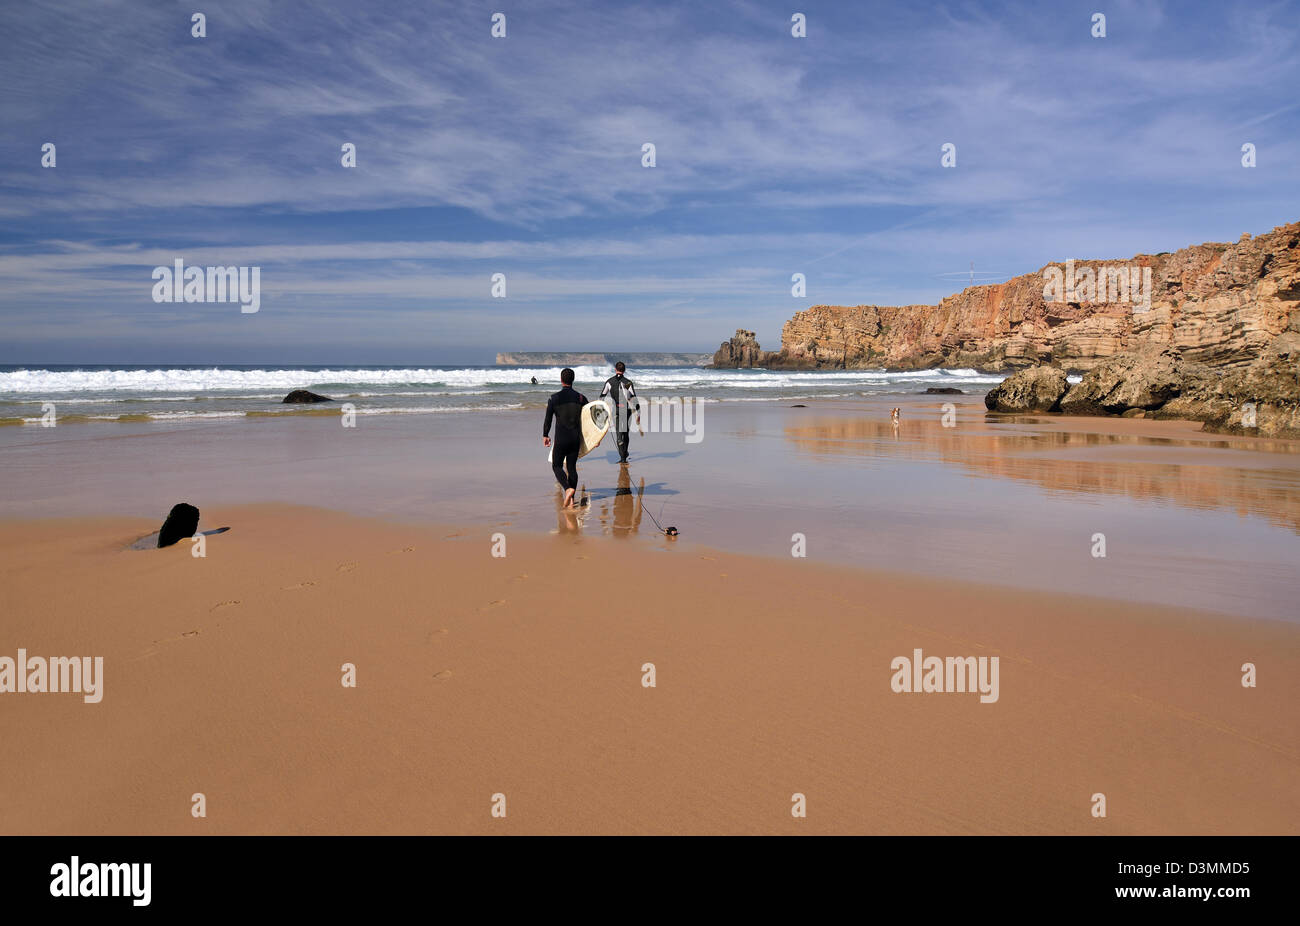 Portugal, Algarve: Surfers with boards entering in the water at beach Praia do Tonel in Sagres Stock Photo